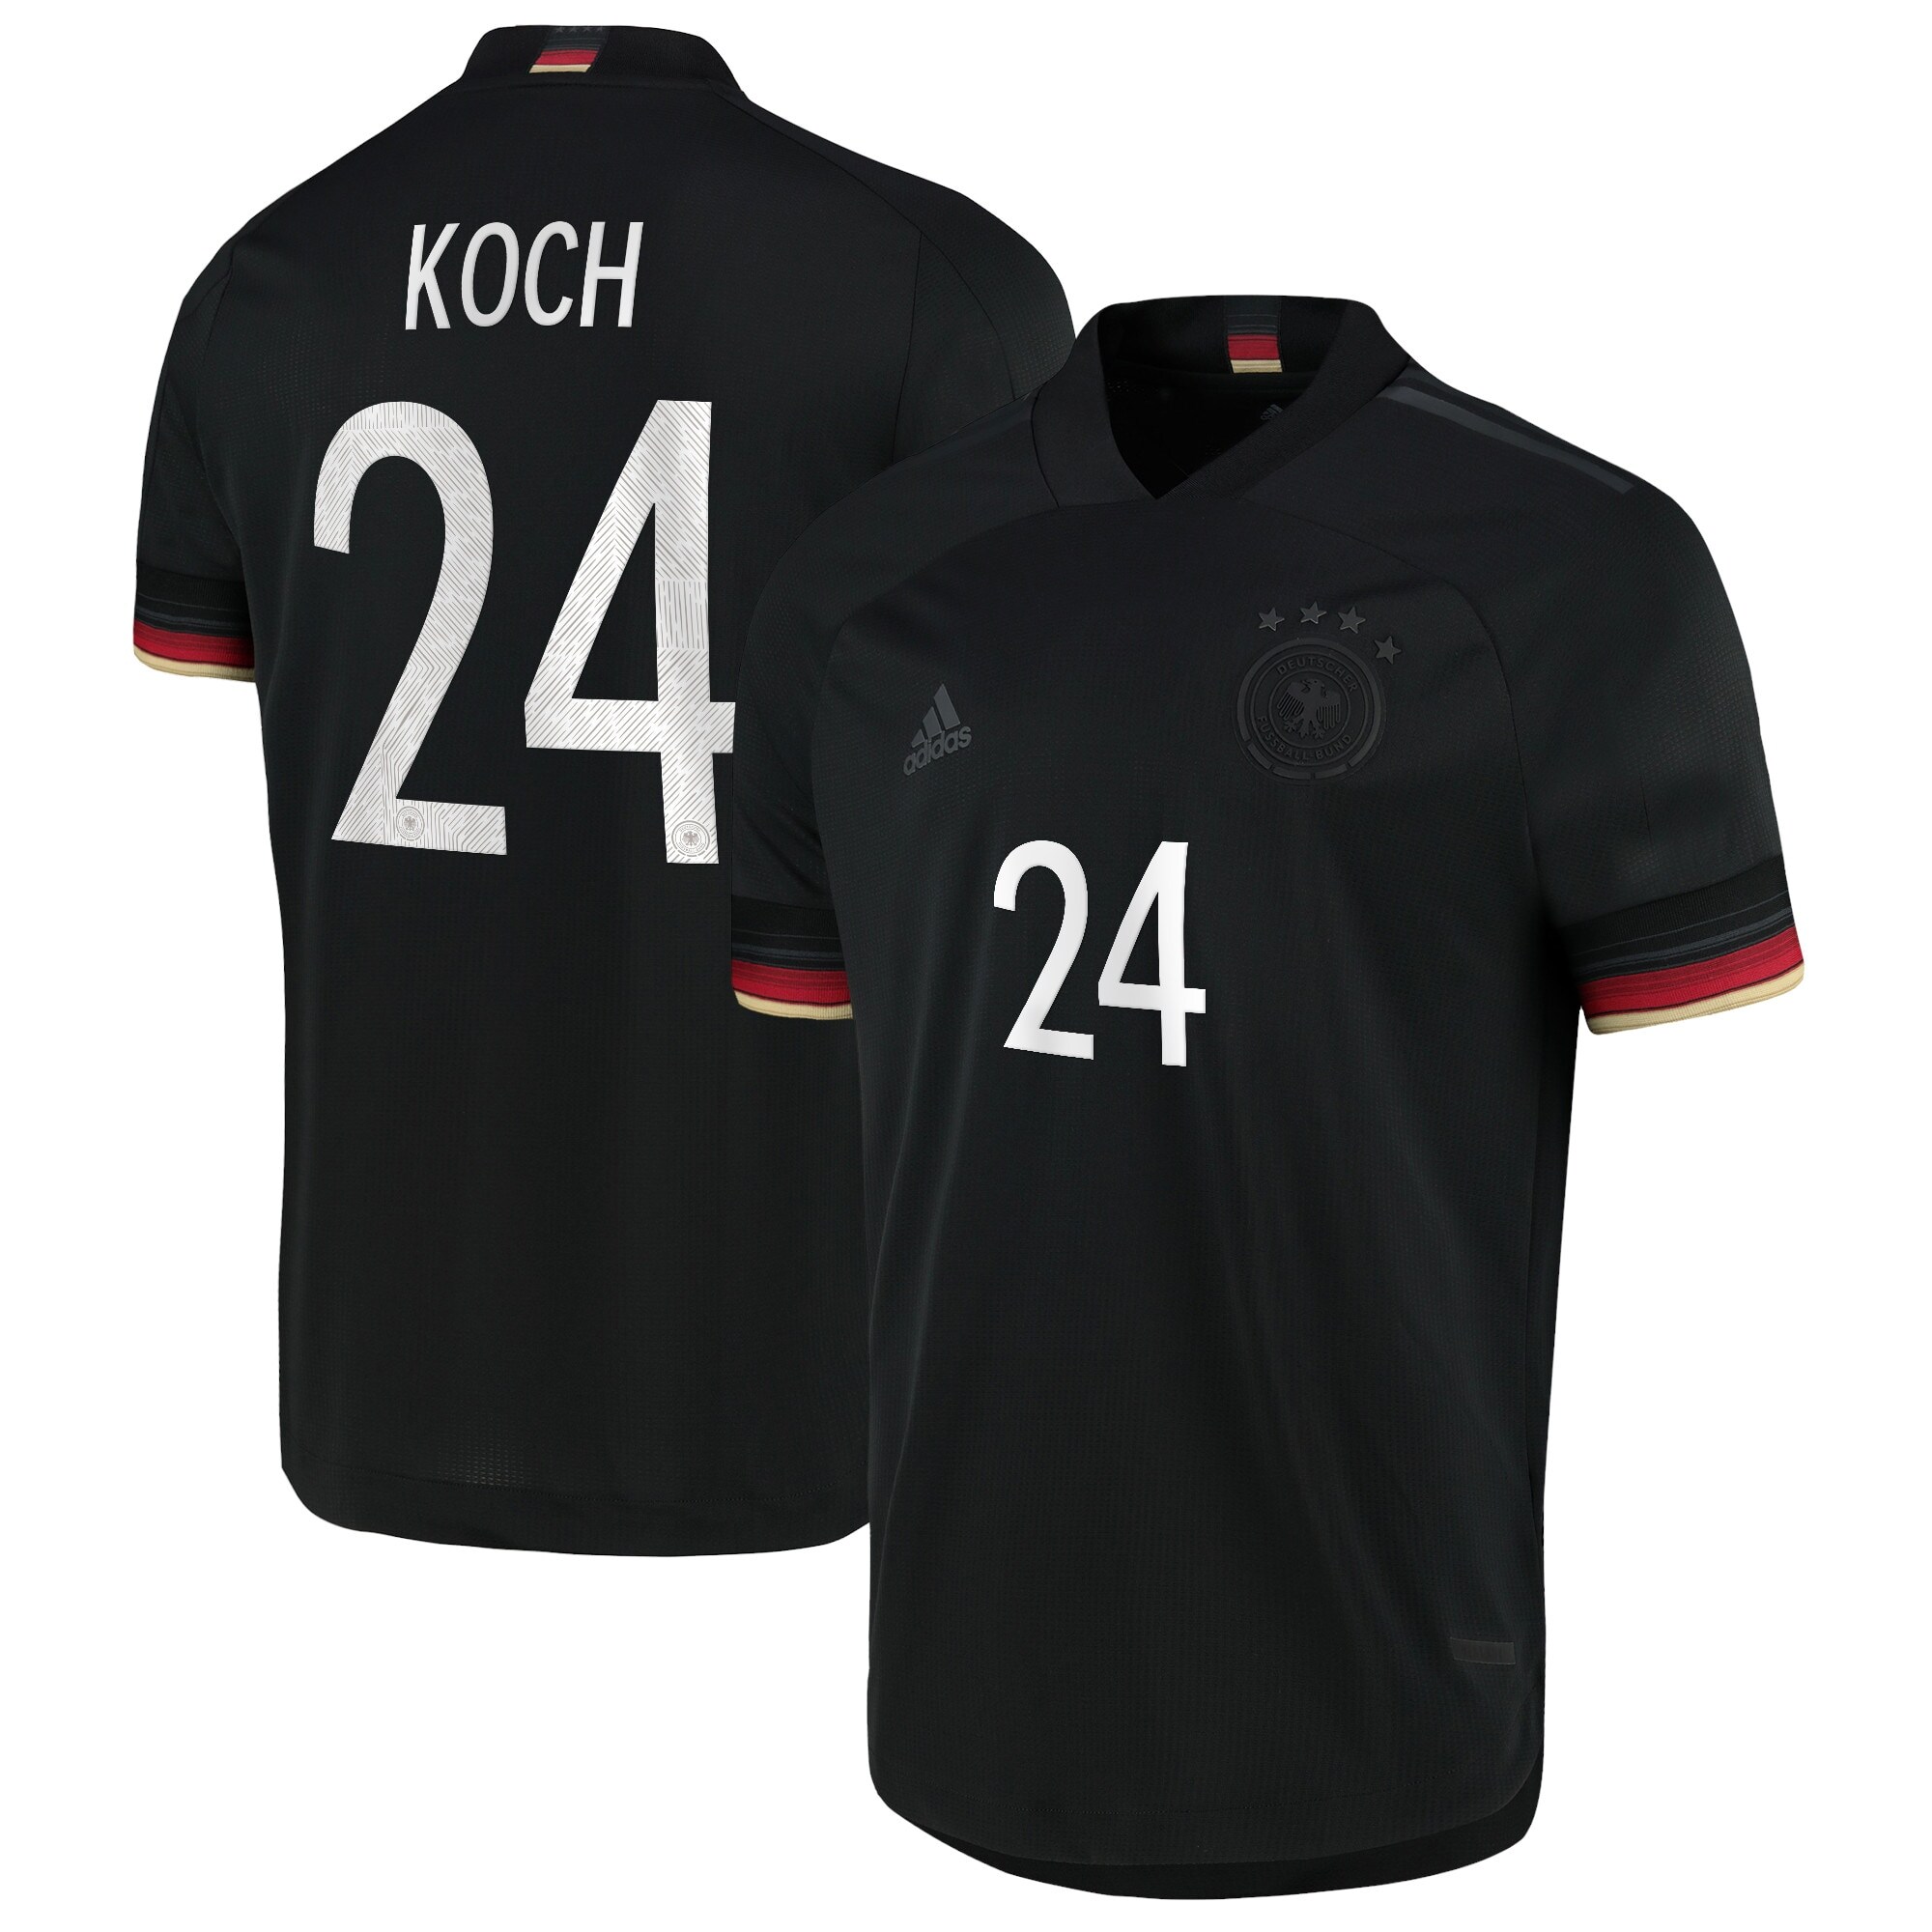 Germany Authentic Away Shirt 2021-22 with Koch 24 printing